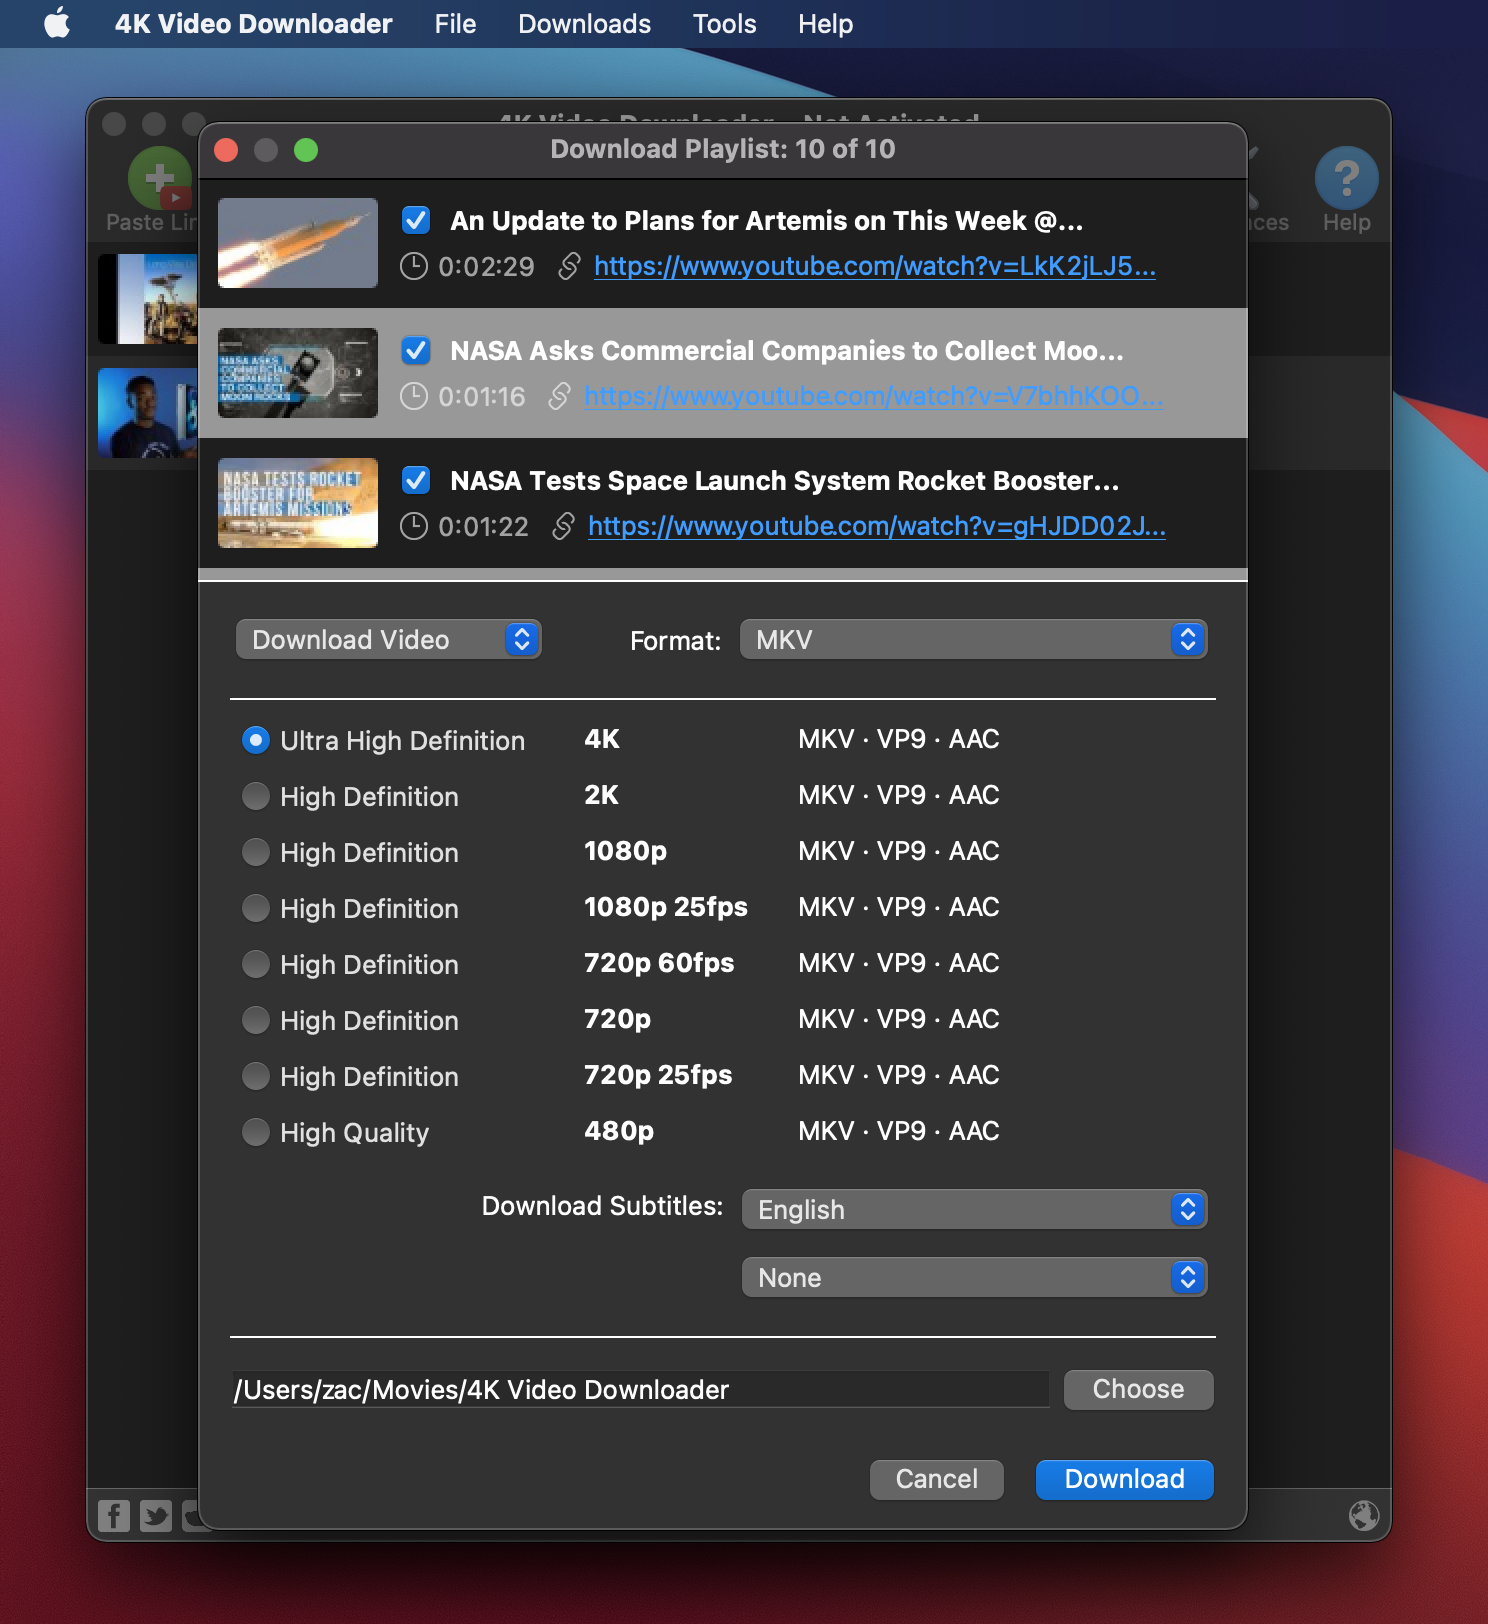 how to install 4k video downloader on mac